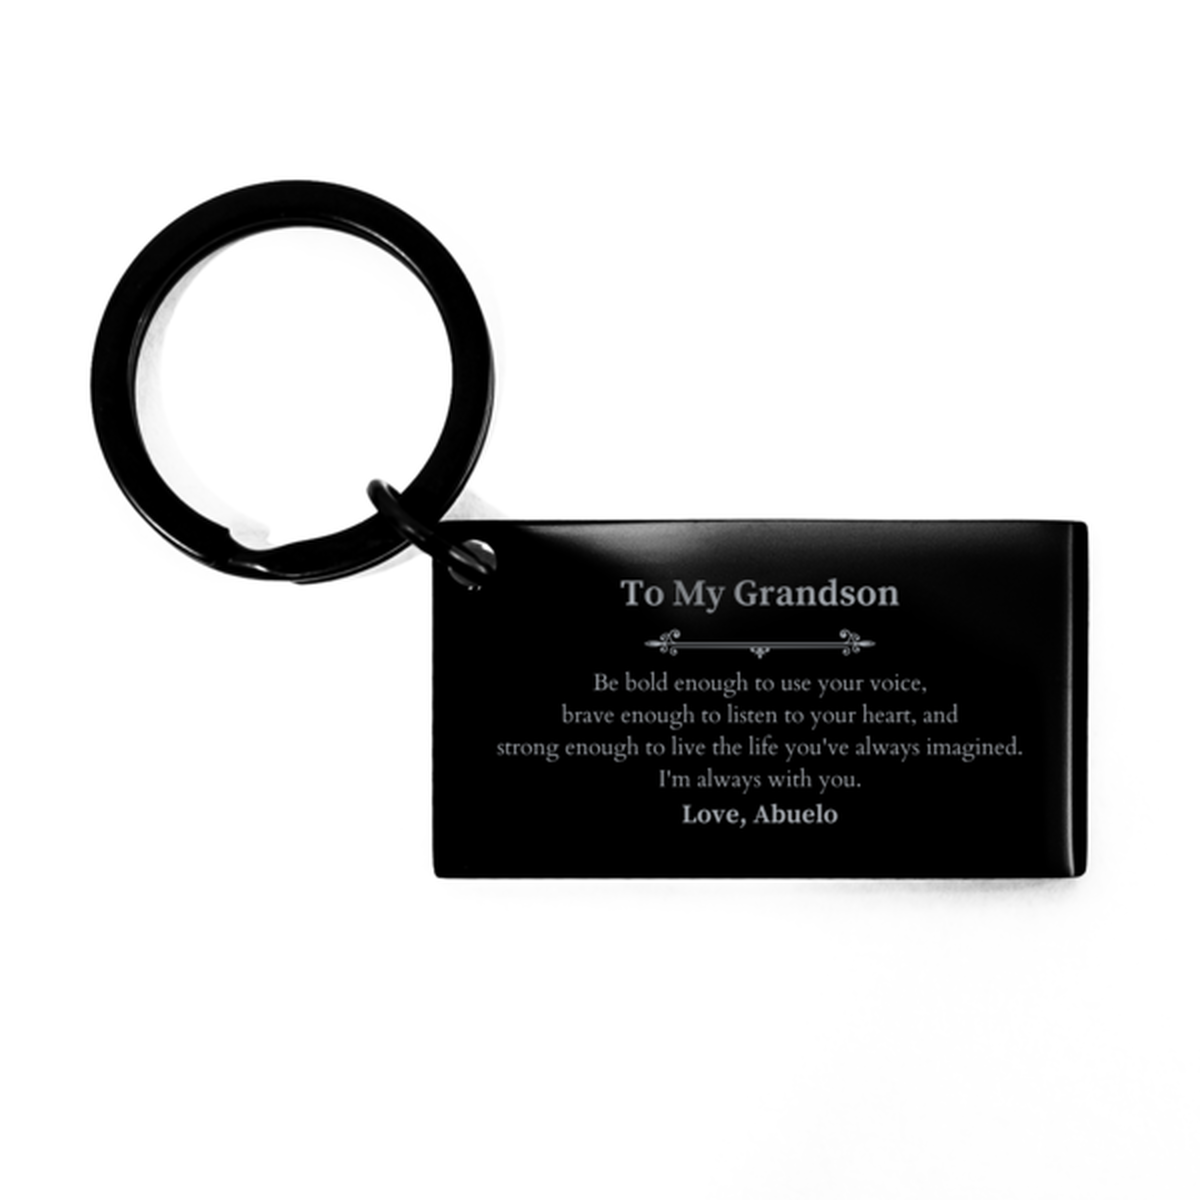 Keepsake Grandson Keychain Gift Idea Graduation Christmas Birthday Grandson from Abuelo, Grandson Be bold enough to use your voice, brave enough to listen to your heart. Love, Abuelo